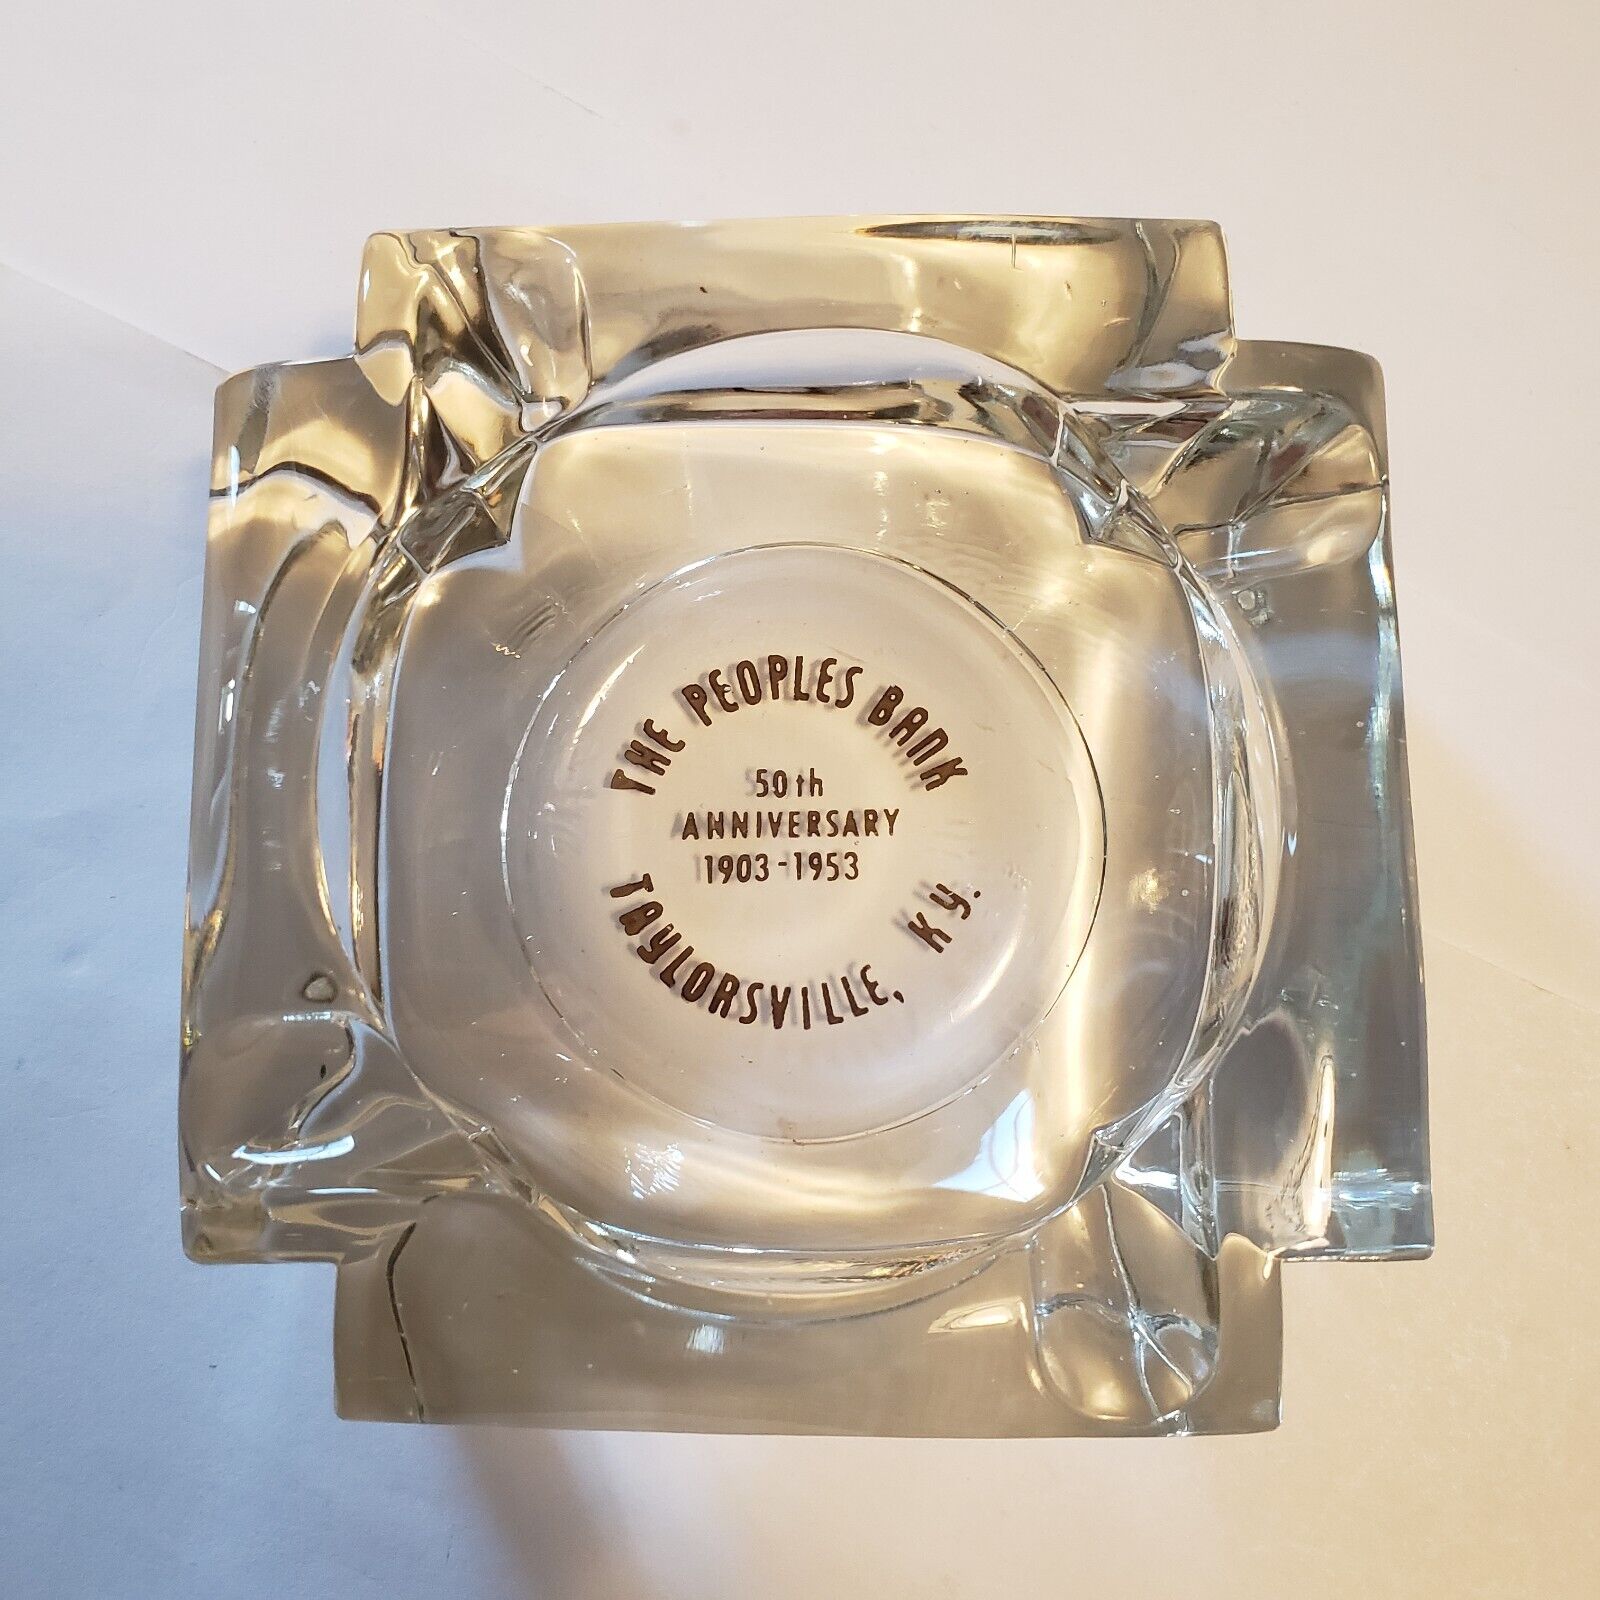 Vintage Glass Ashtray Paper Weight The Peoples Bank 50th Anniversary Kentucky